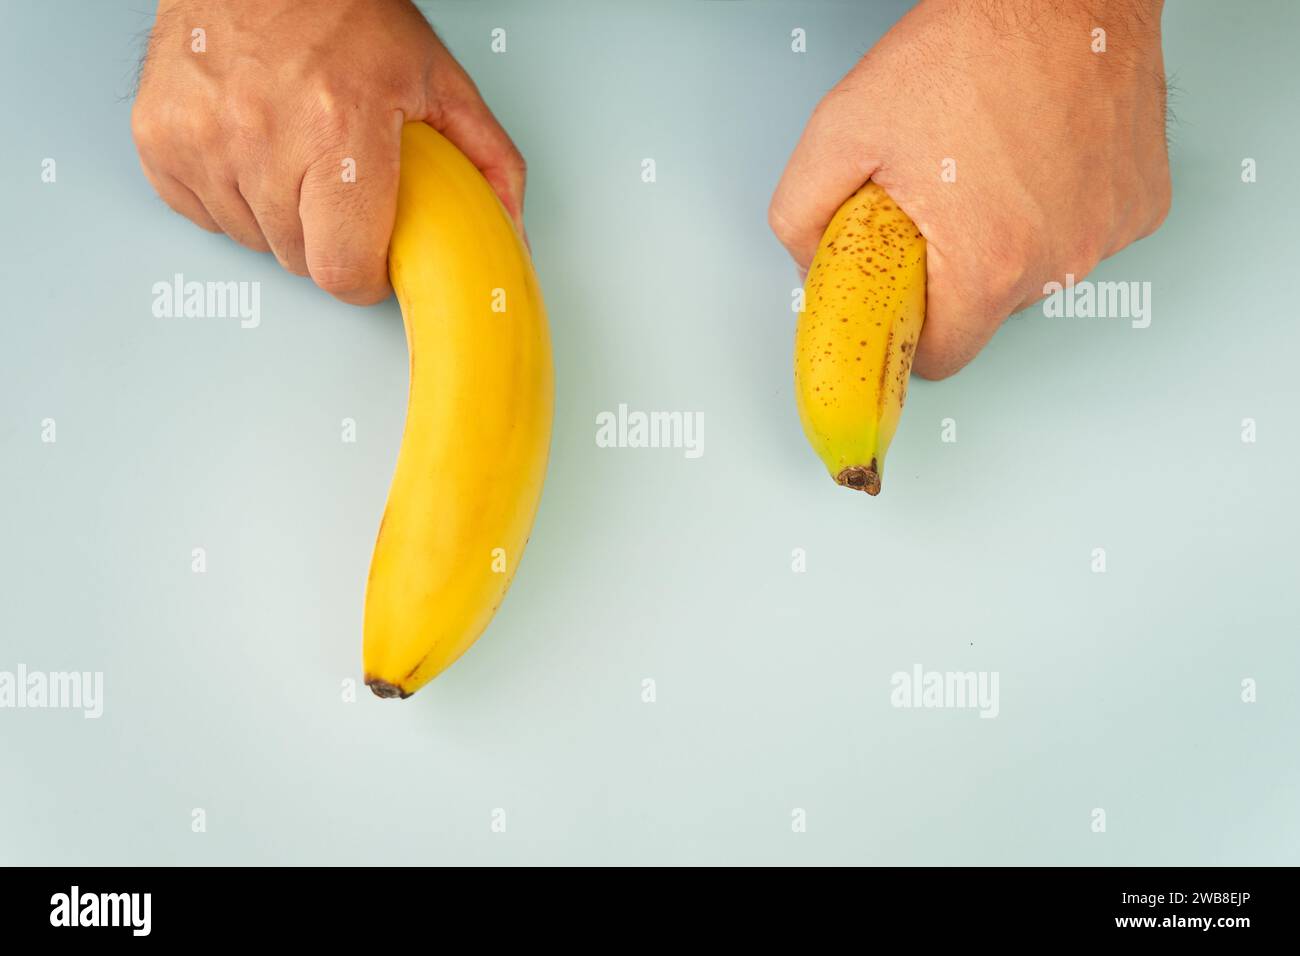 Small Banana compare size wish banana on blue background. Sexual life libido, penis size and potency concept. Flat lay, top view, copy space Stock Photo